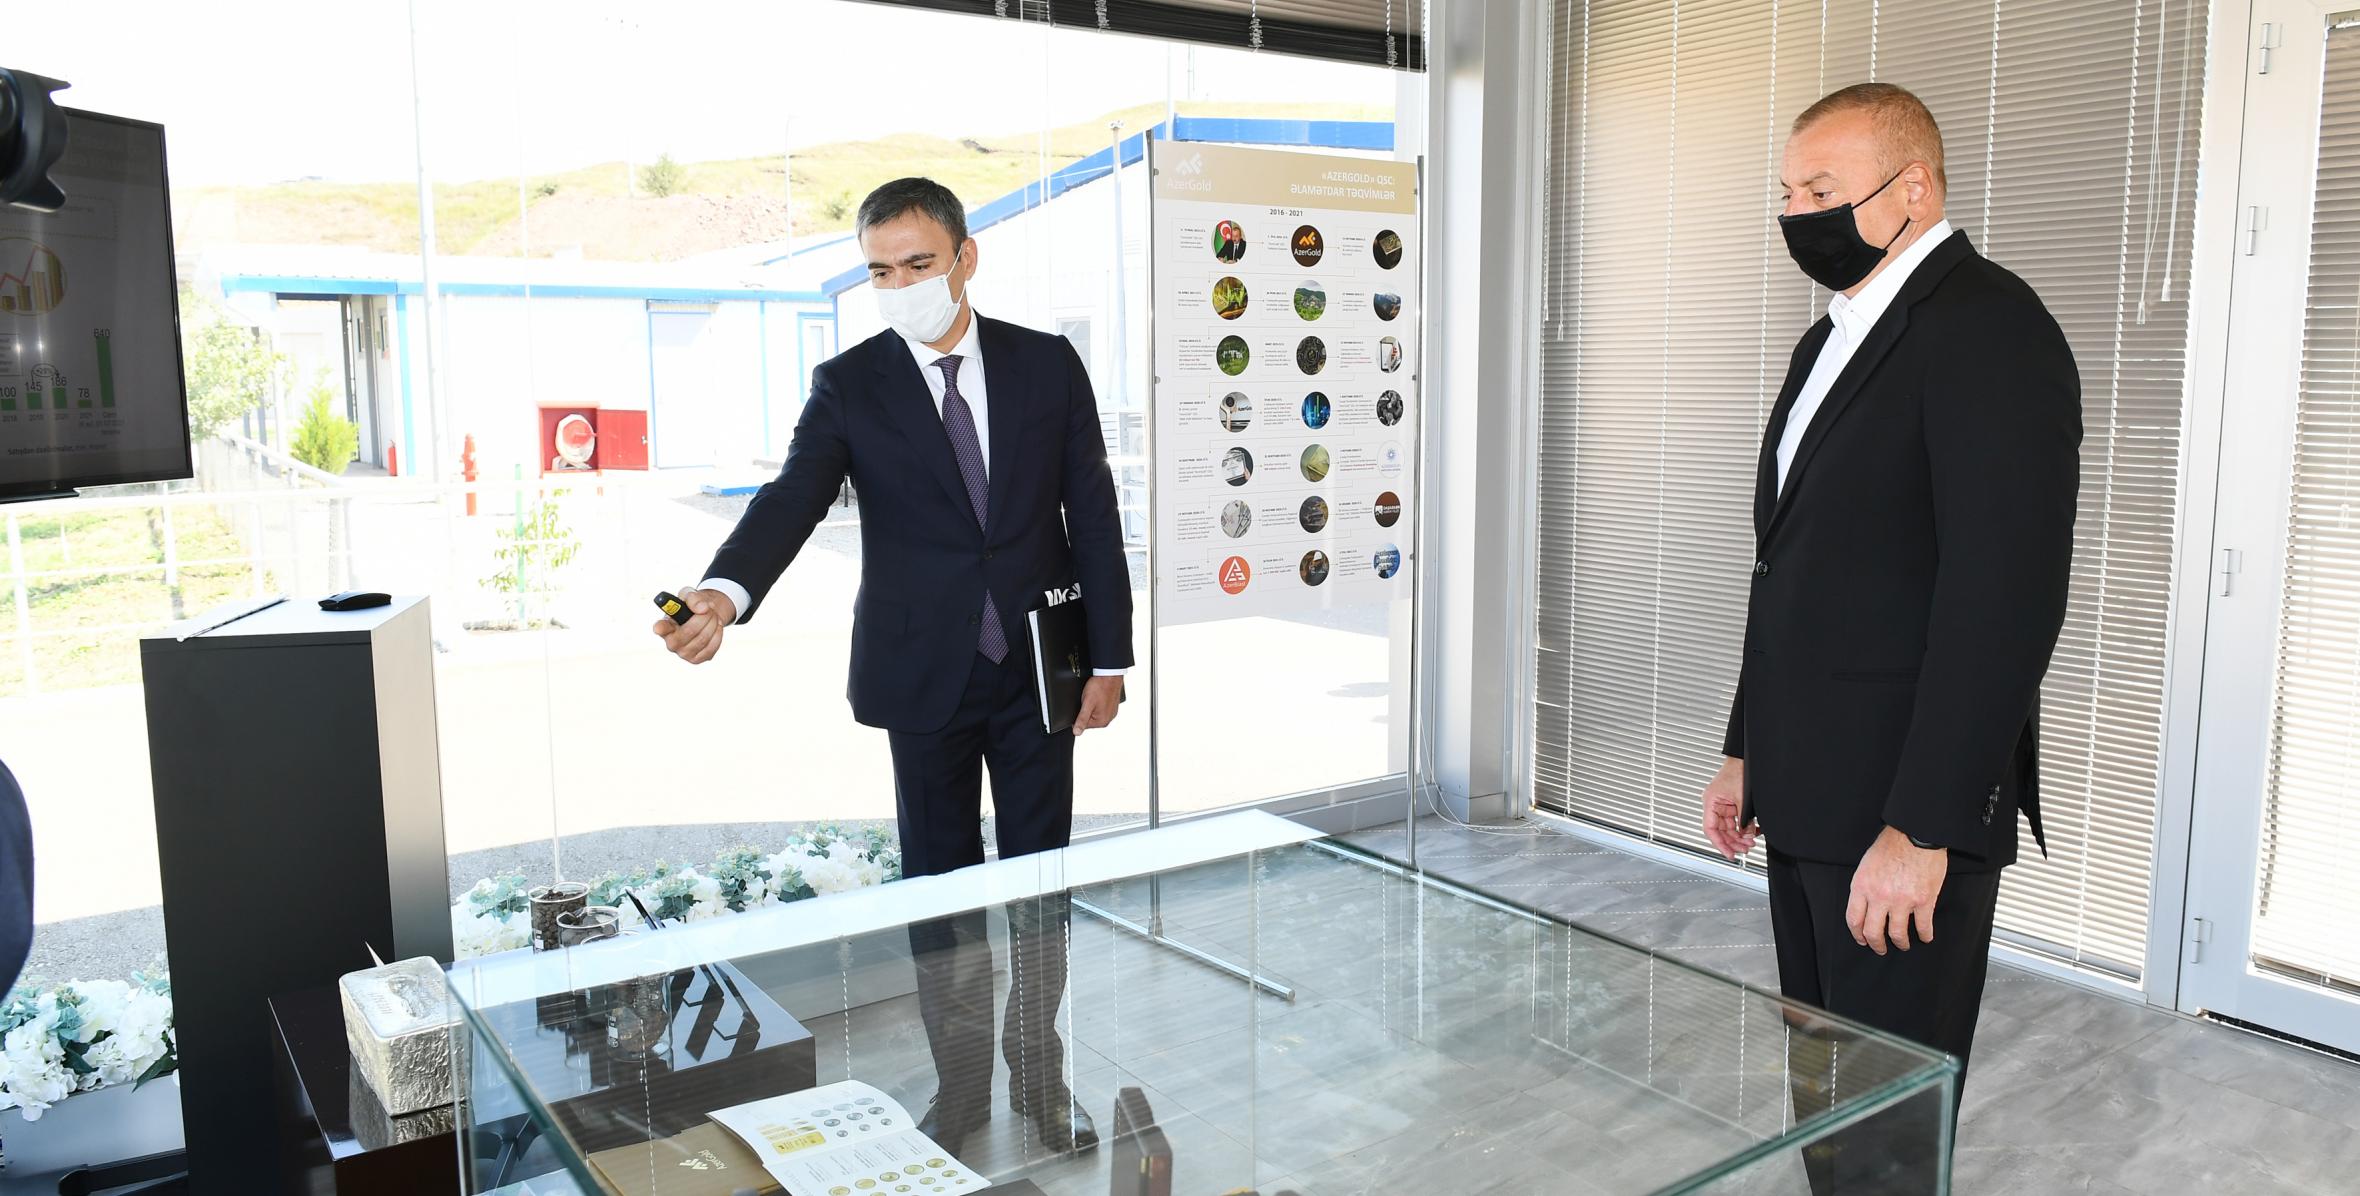 Ilham Aliyev viewed activities of Chovdar Integrated Regional Processing Area owned by AzerGold CJSC